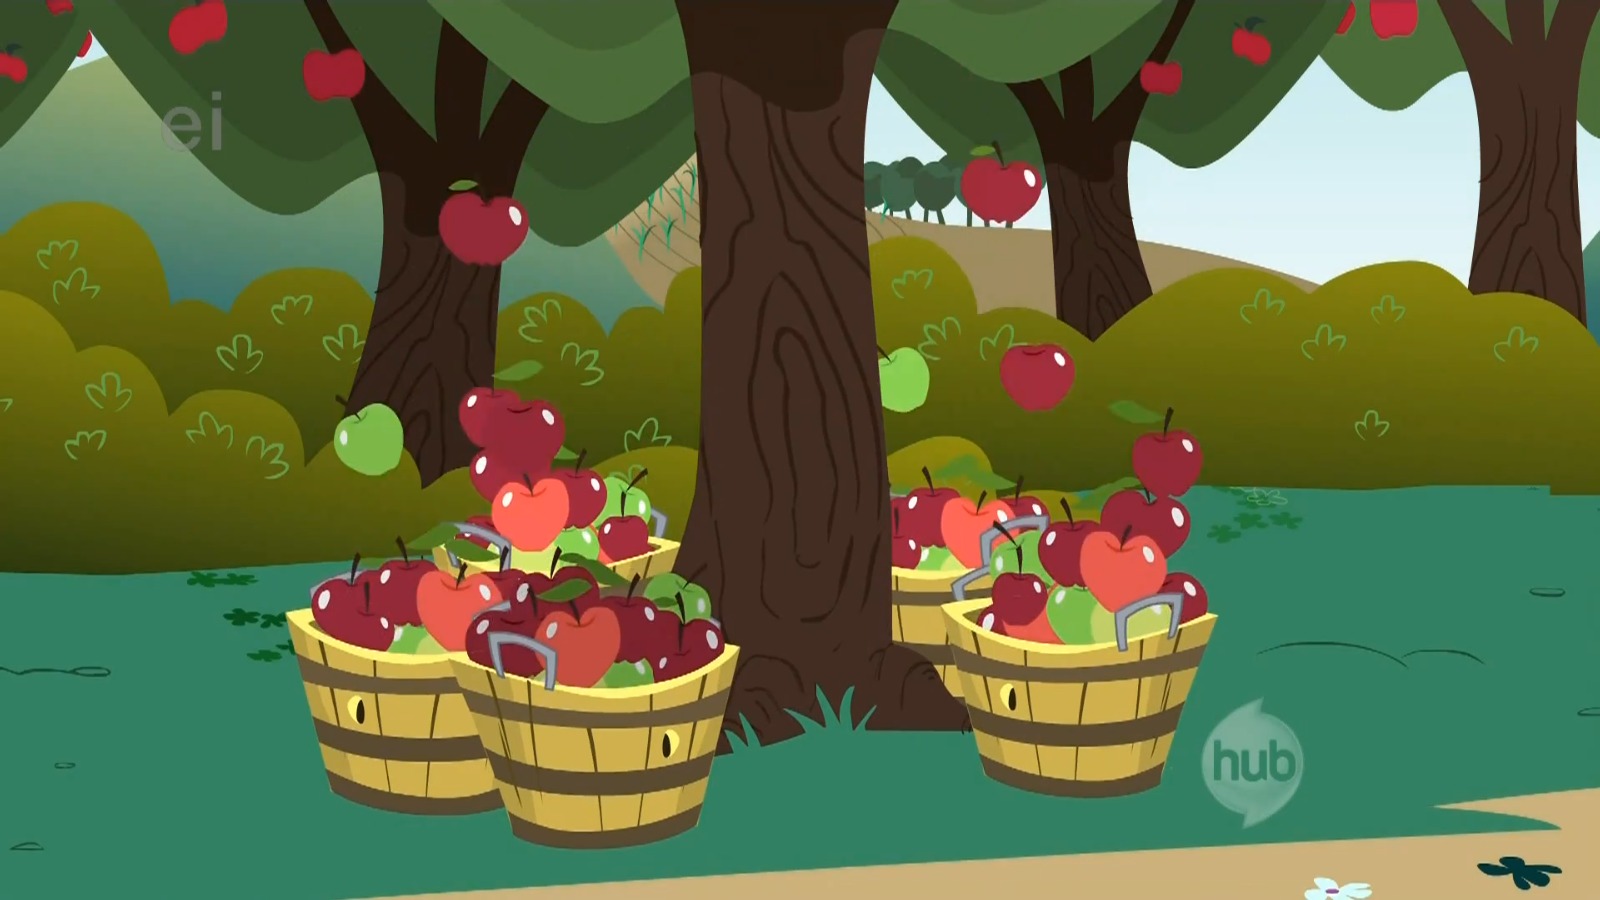 Apples_falling_into_baskets_S1E01